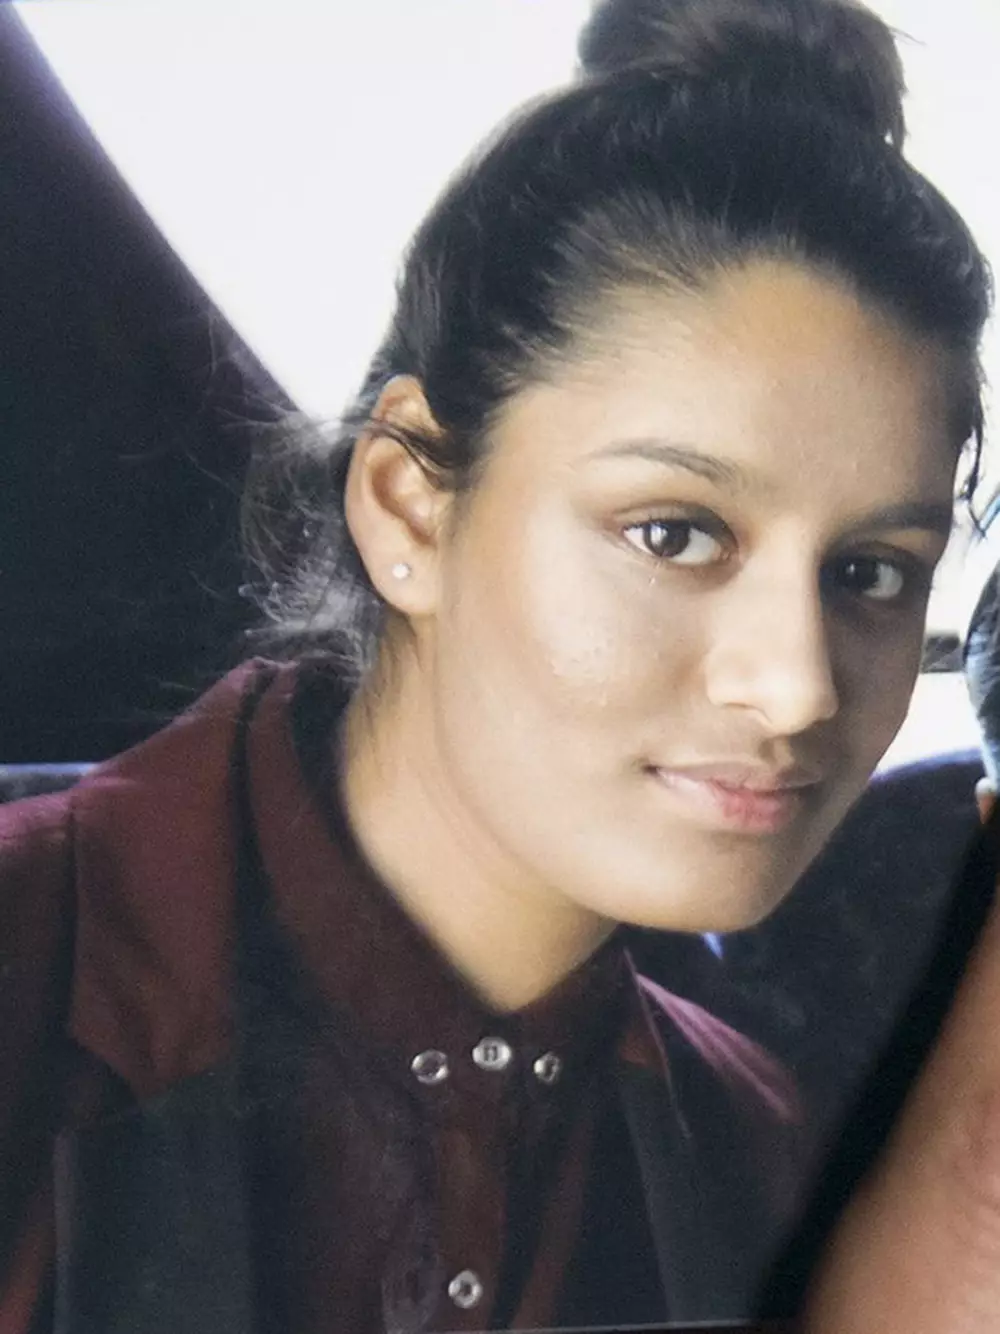 Shamima Begum recently had her UK citizenship revoked for leaving Britain to become a jihadi bride.